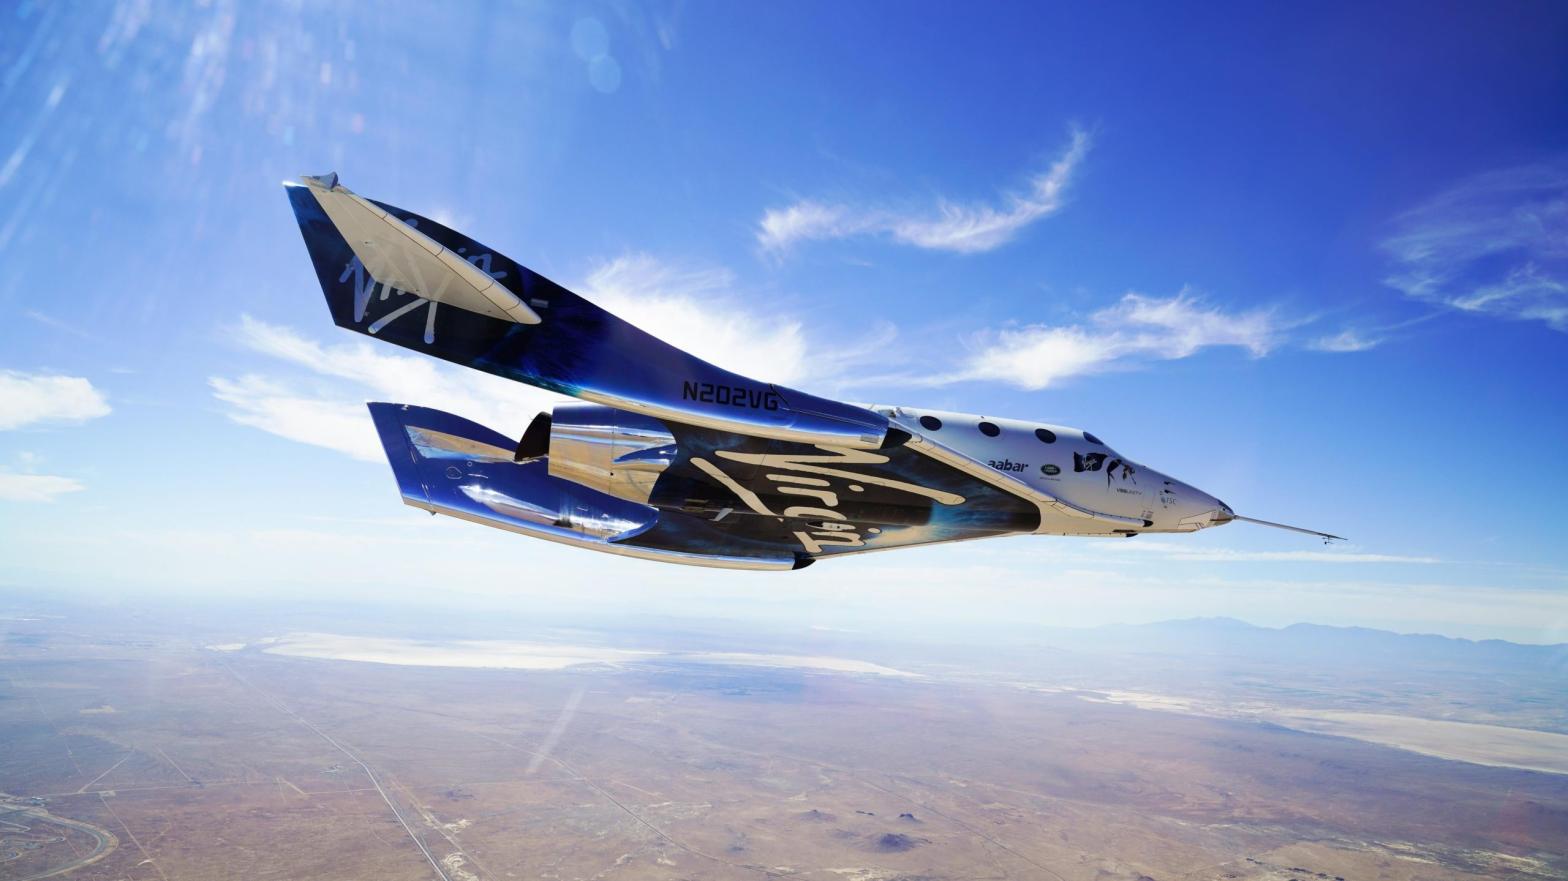 VSS Unity gliding back home after its second supersonic flight in 2018. (Image: Virgin Galactic)